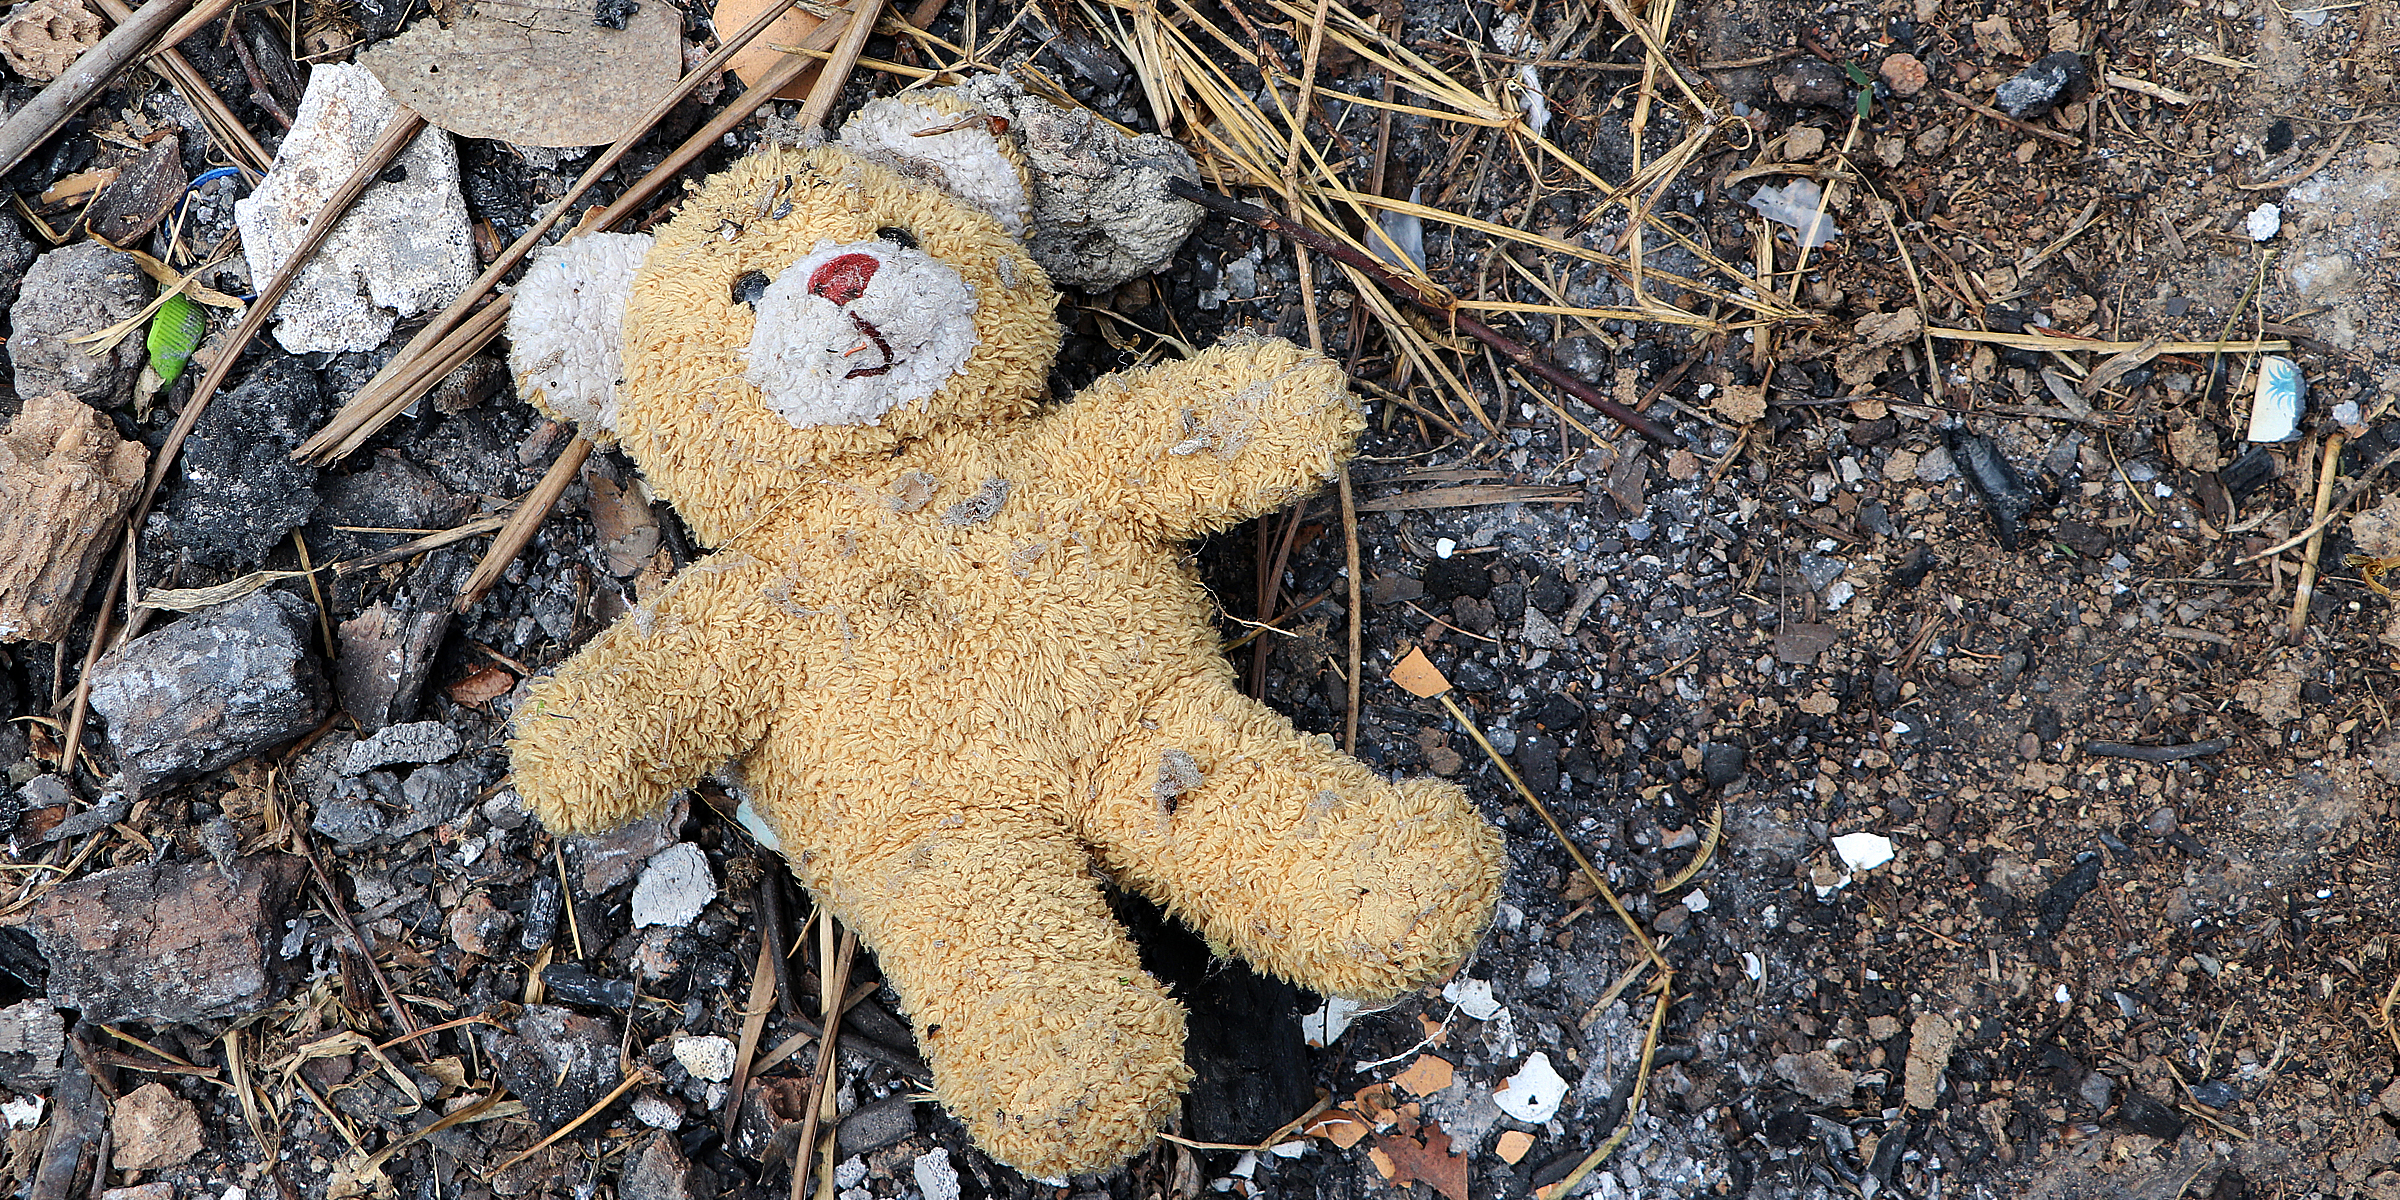 A teddy bear lying on the ground | Source: Getty Images